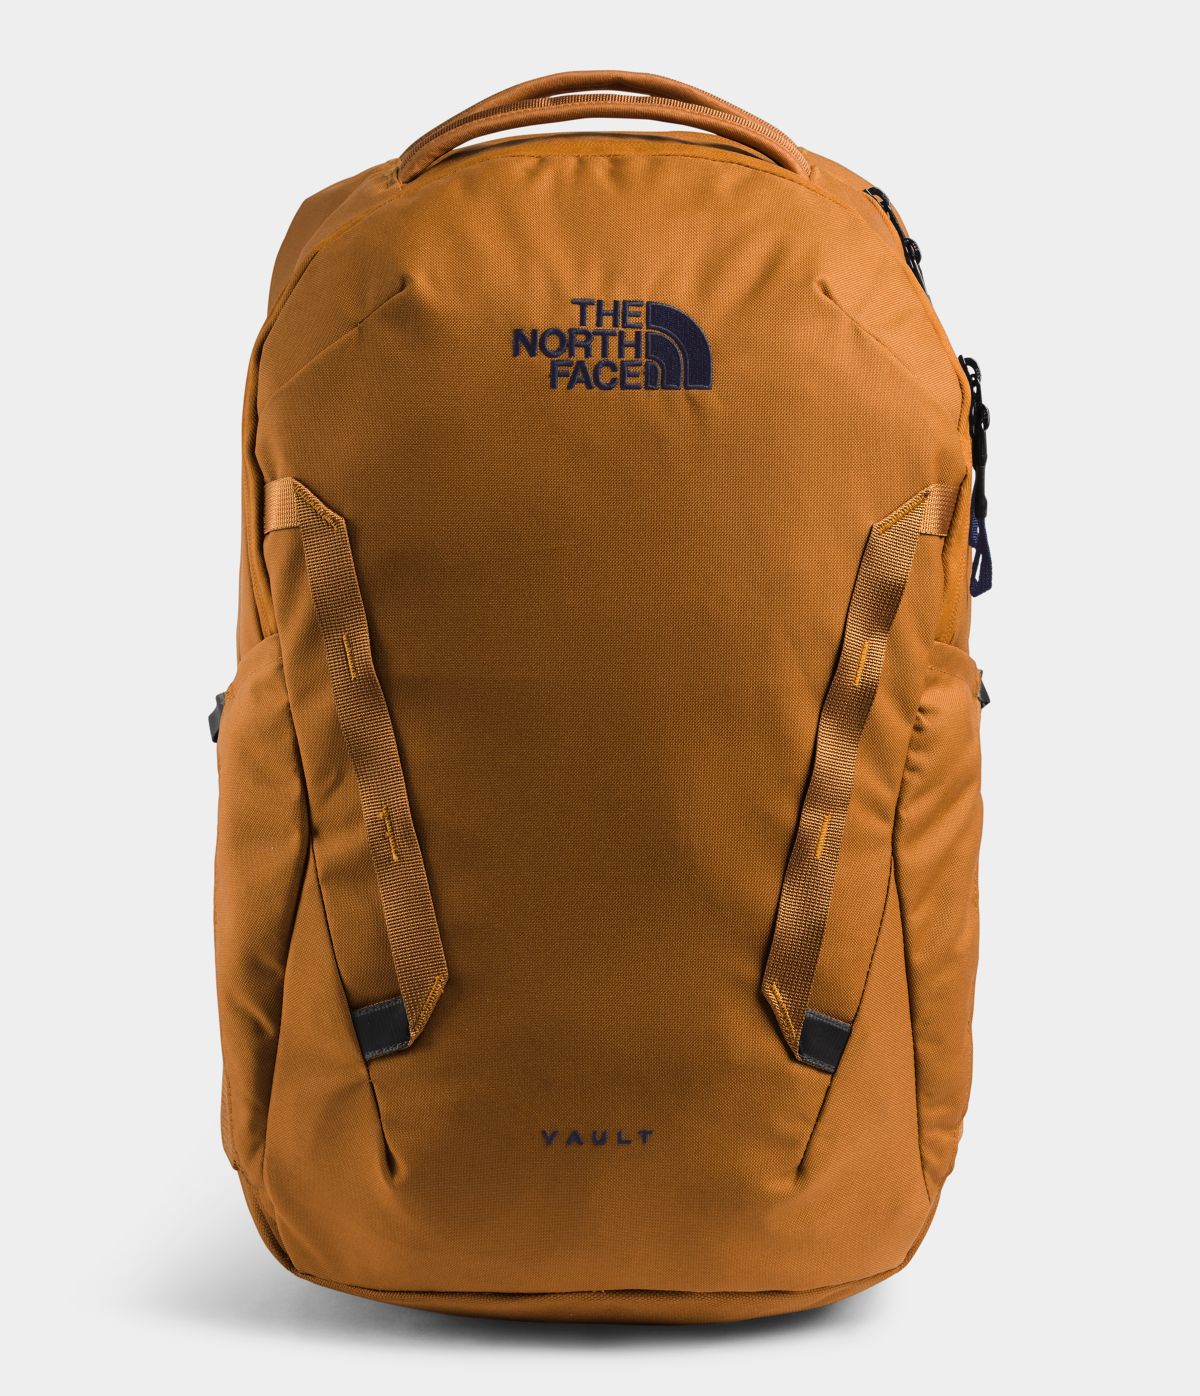 Unisex The North Face Vault Backpack in Timber Tan/TNF Navy from front view